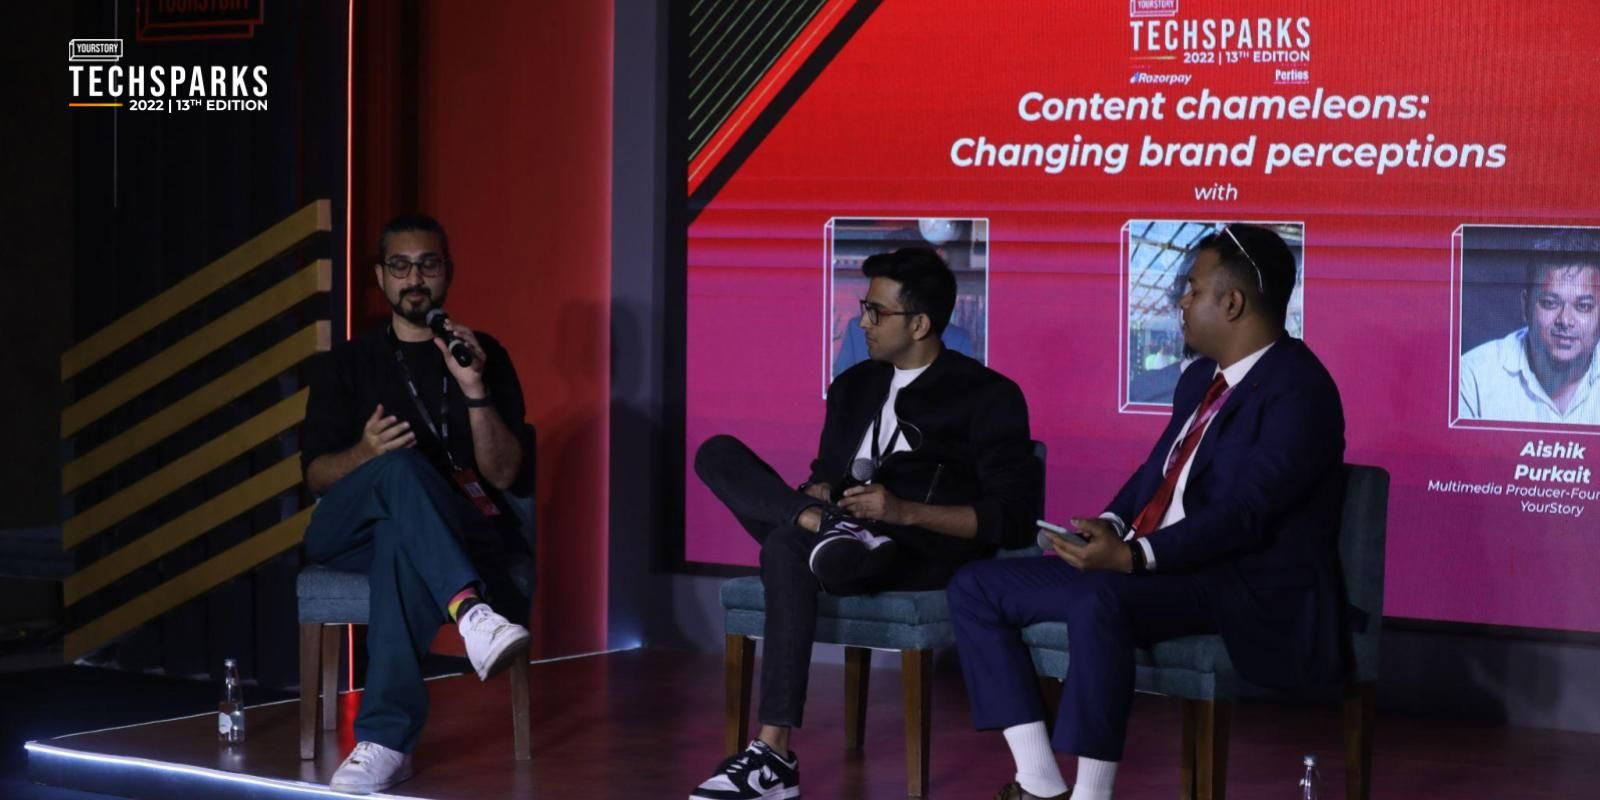 TechSparks 2022: Highlights from the session on understanding changing brand perceptions